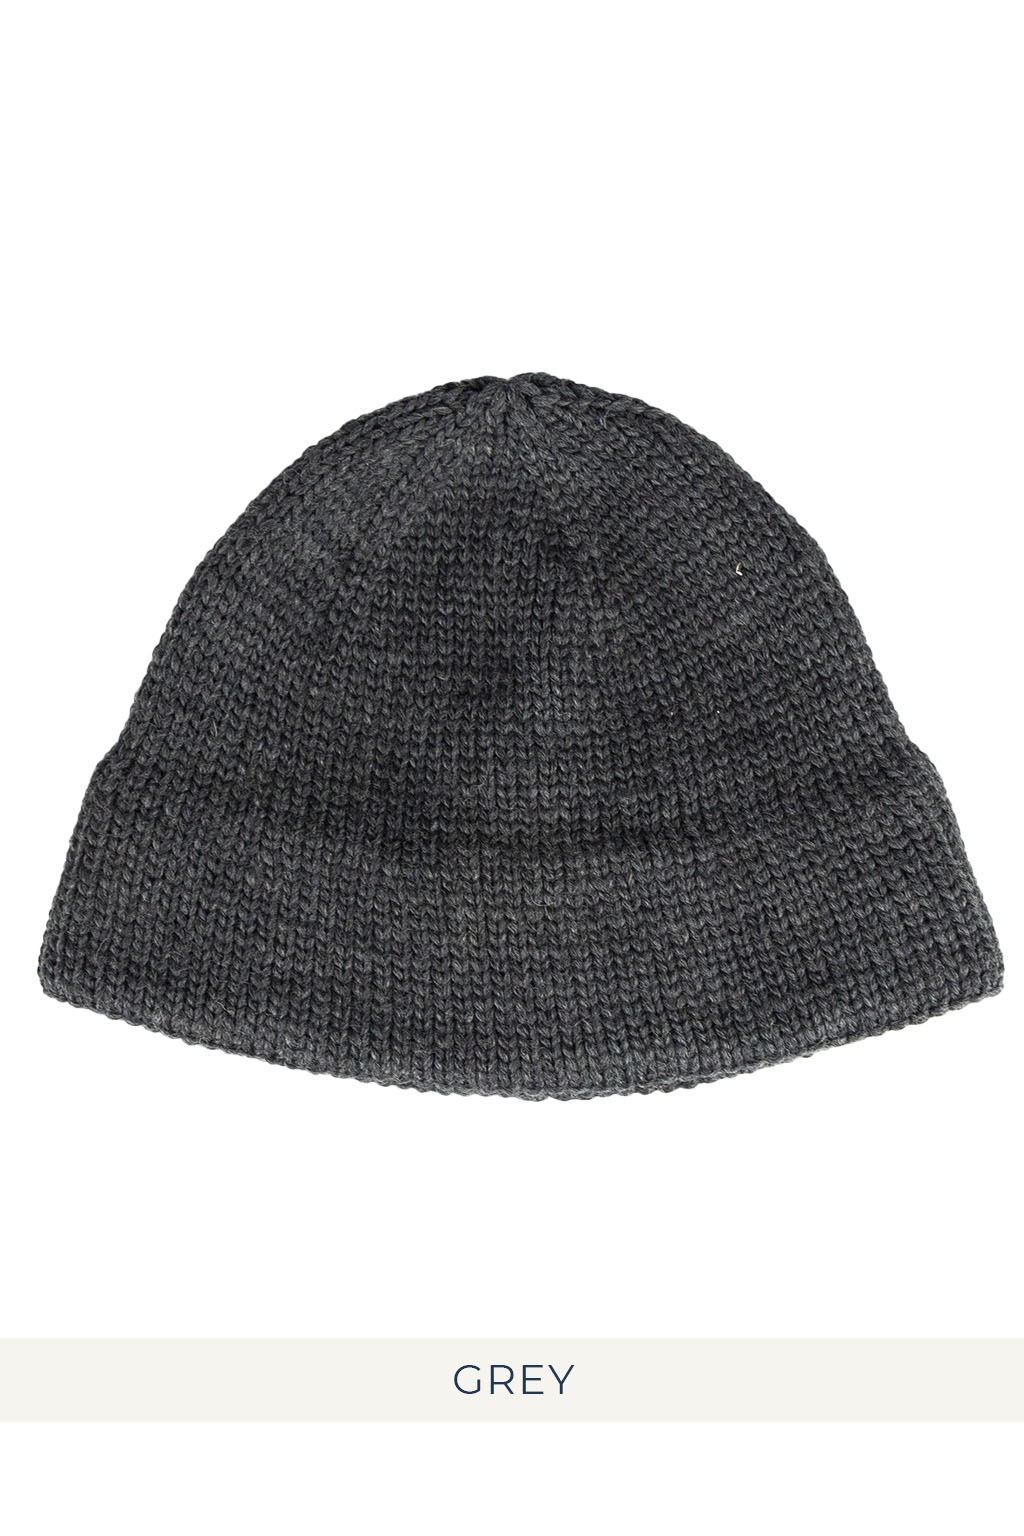 Cableami Wool Dixi w/ Cap - 3 color choices